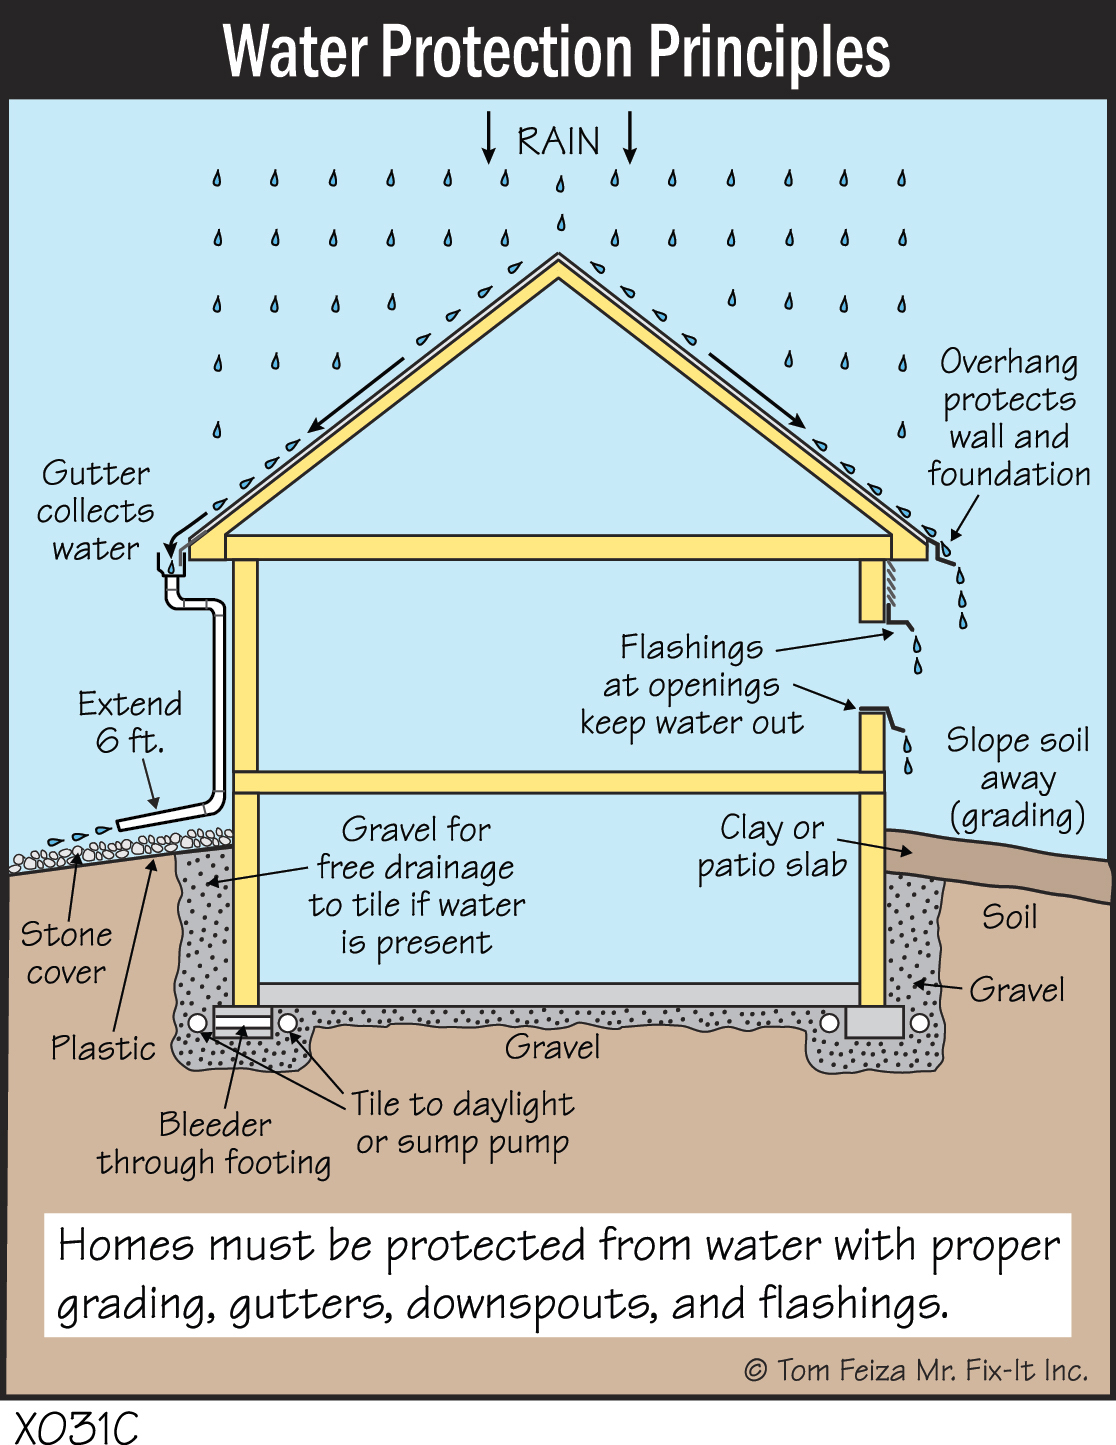 X031C - Water Protection Principles